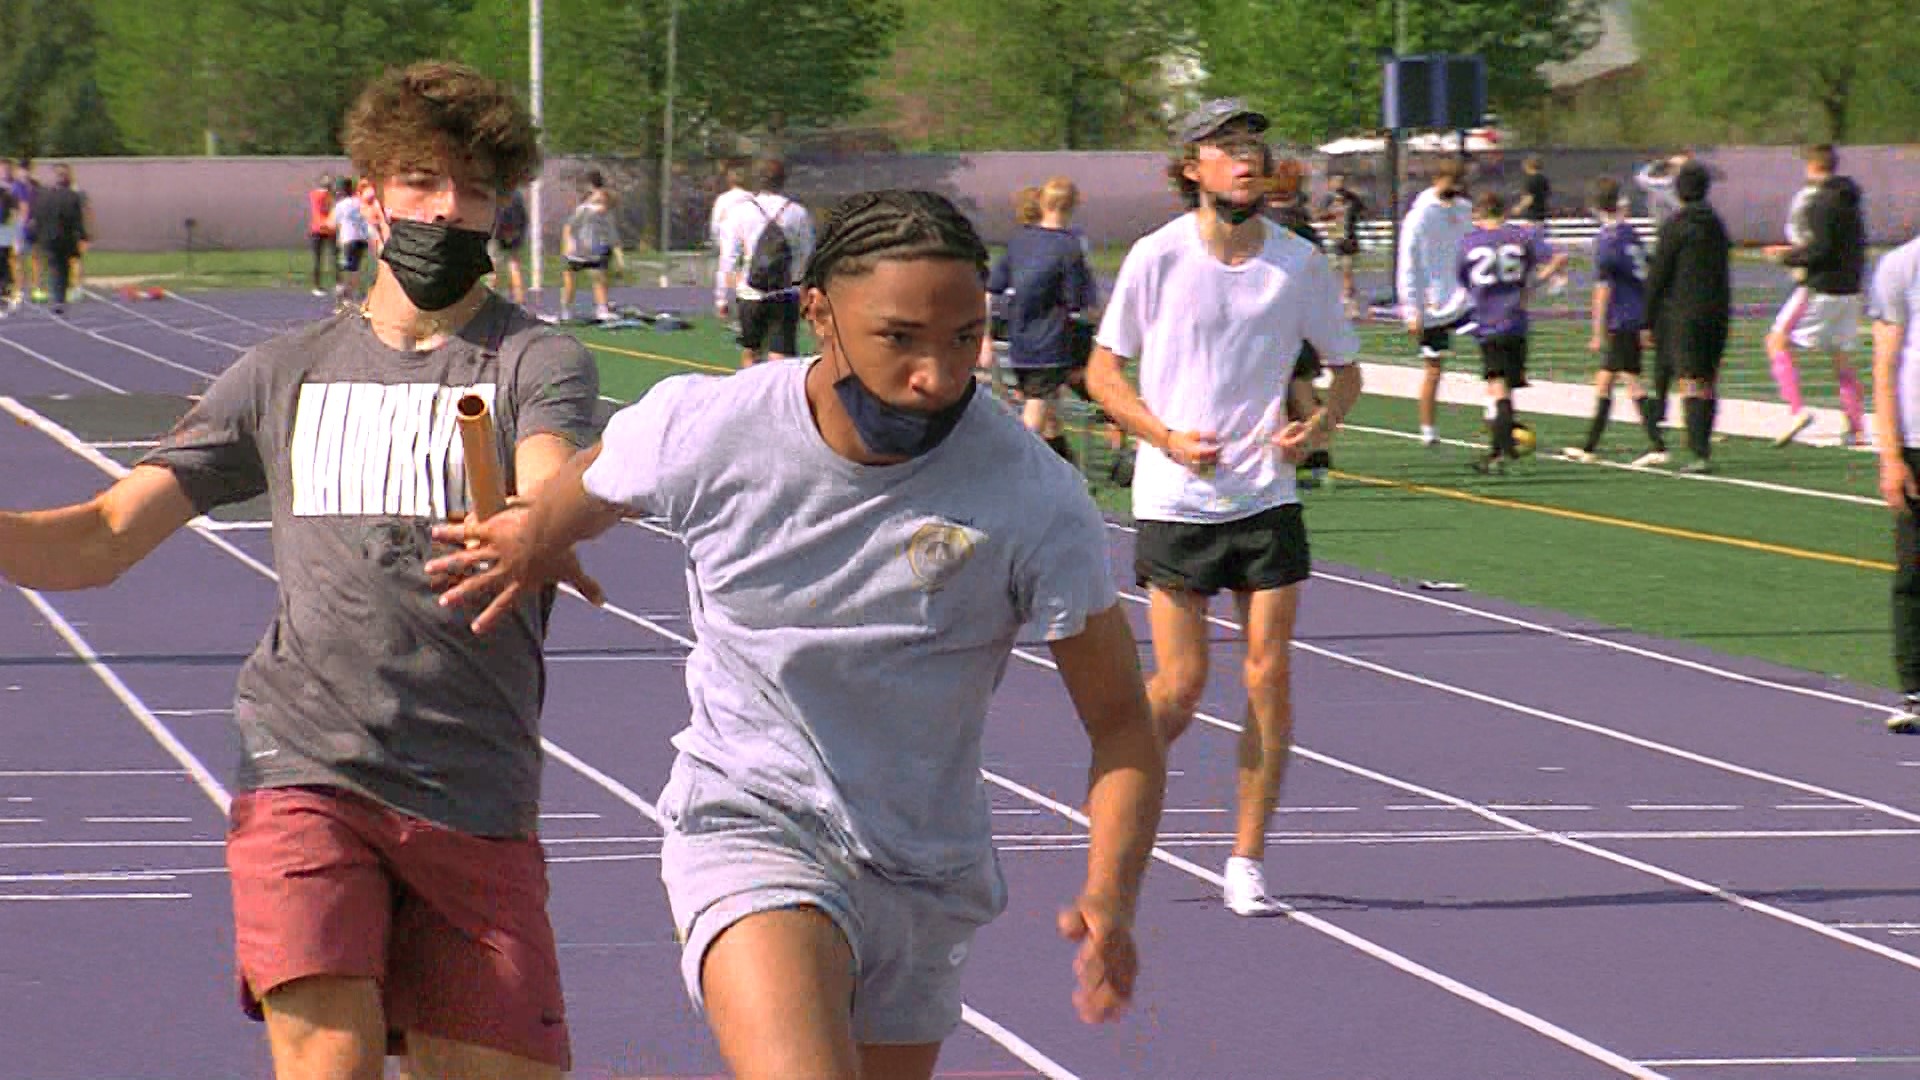 Aaron Smith decommitted from Yale football and is hoping to boost his college track attention with a strong finish his senior year at Waukee.